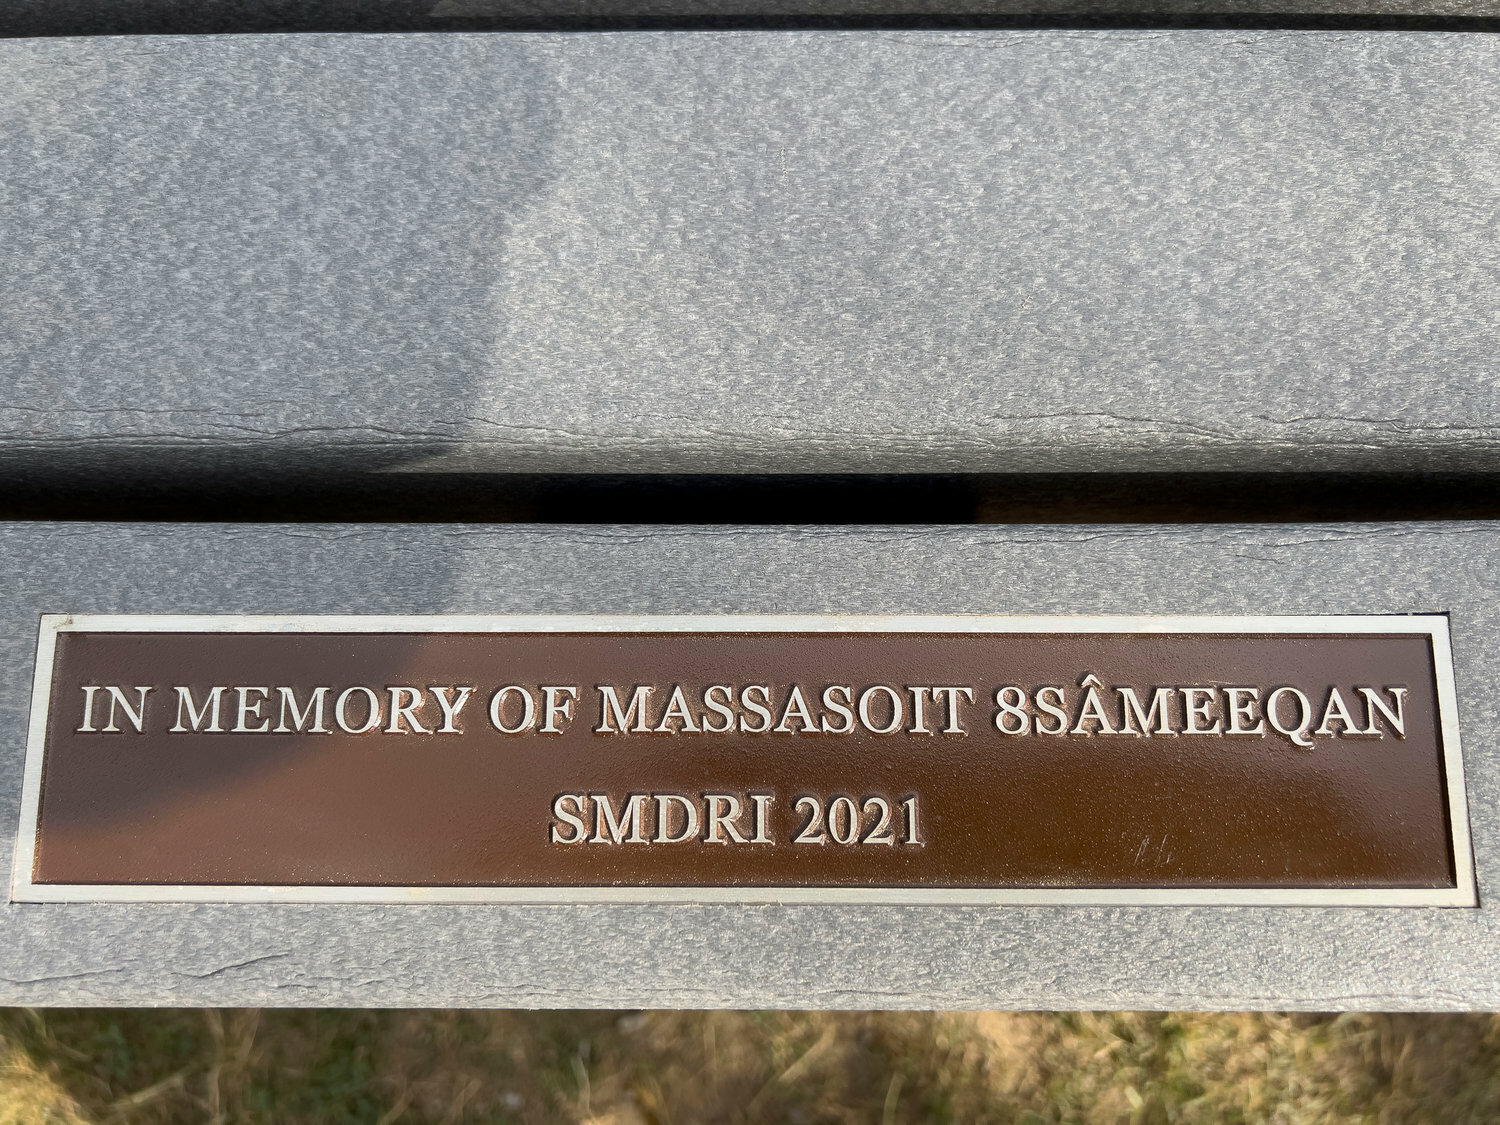 This bench at Burr's Hill commemorates Massasoit Ousamequin, who assisted early American settlers during their grueling first winters in the New World. It was dedicated in August of 2022.